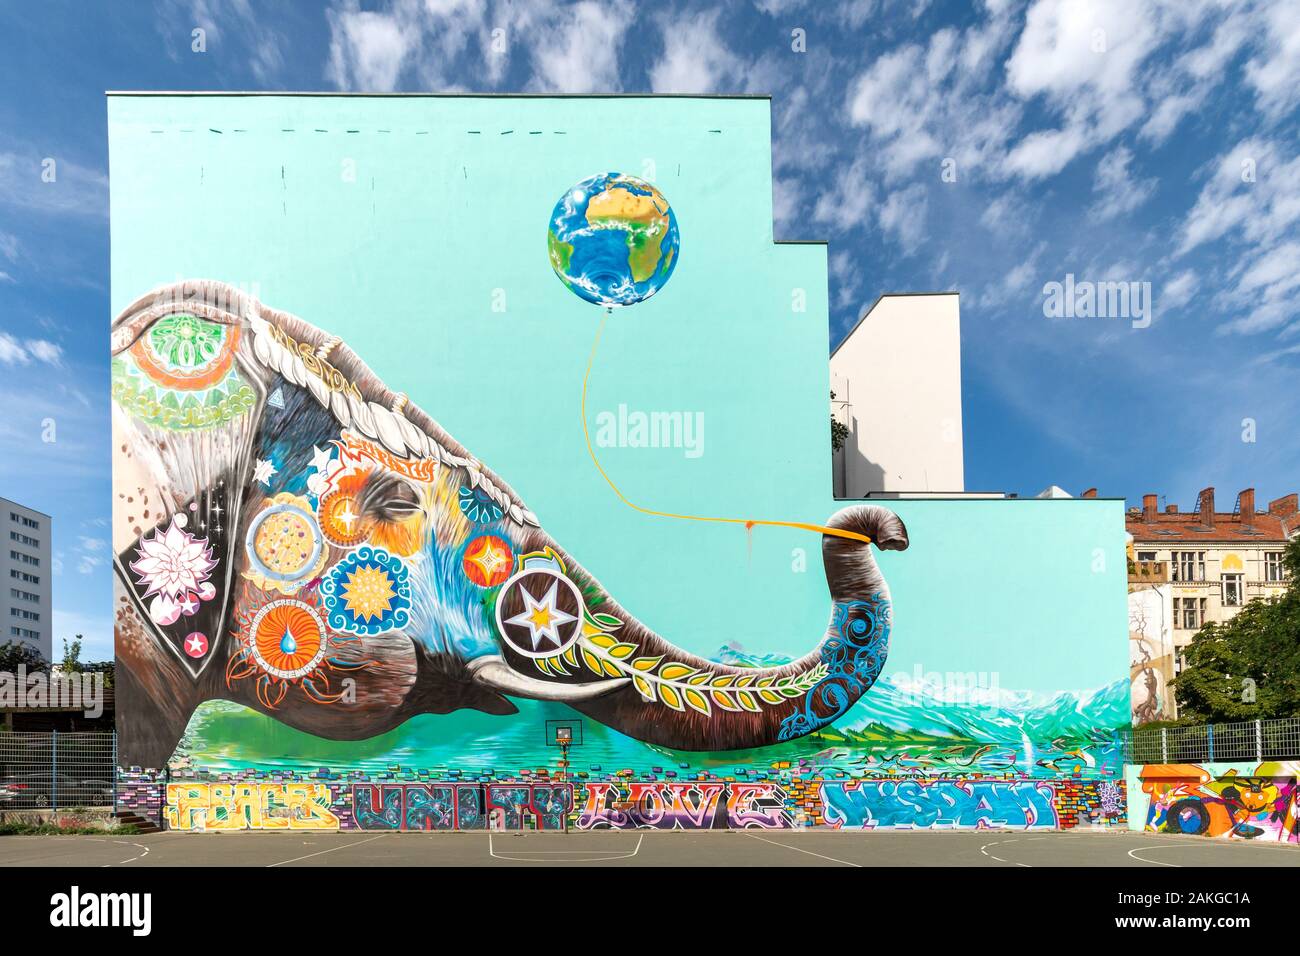 Wide angle view of a huge graffiti on the side of a high rise building portraying a colorful elephant against a light blue background Stock Photo